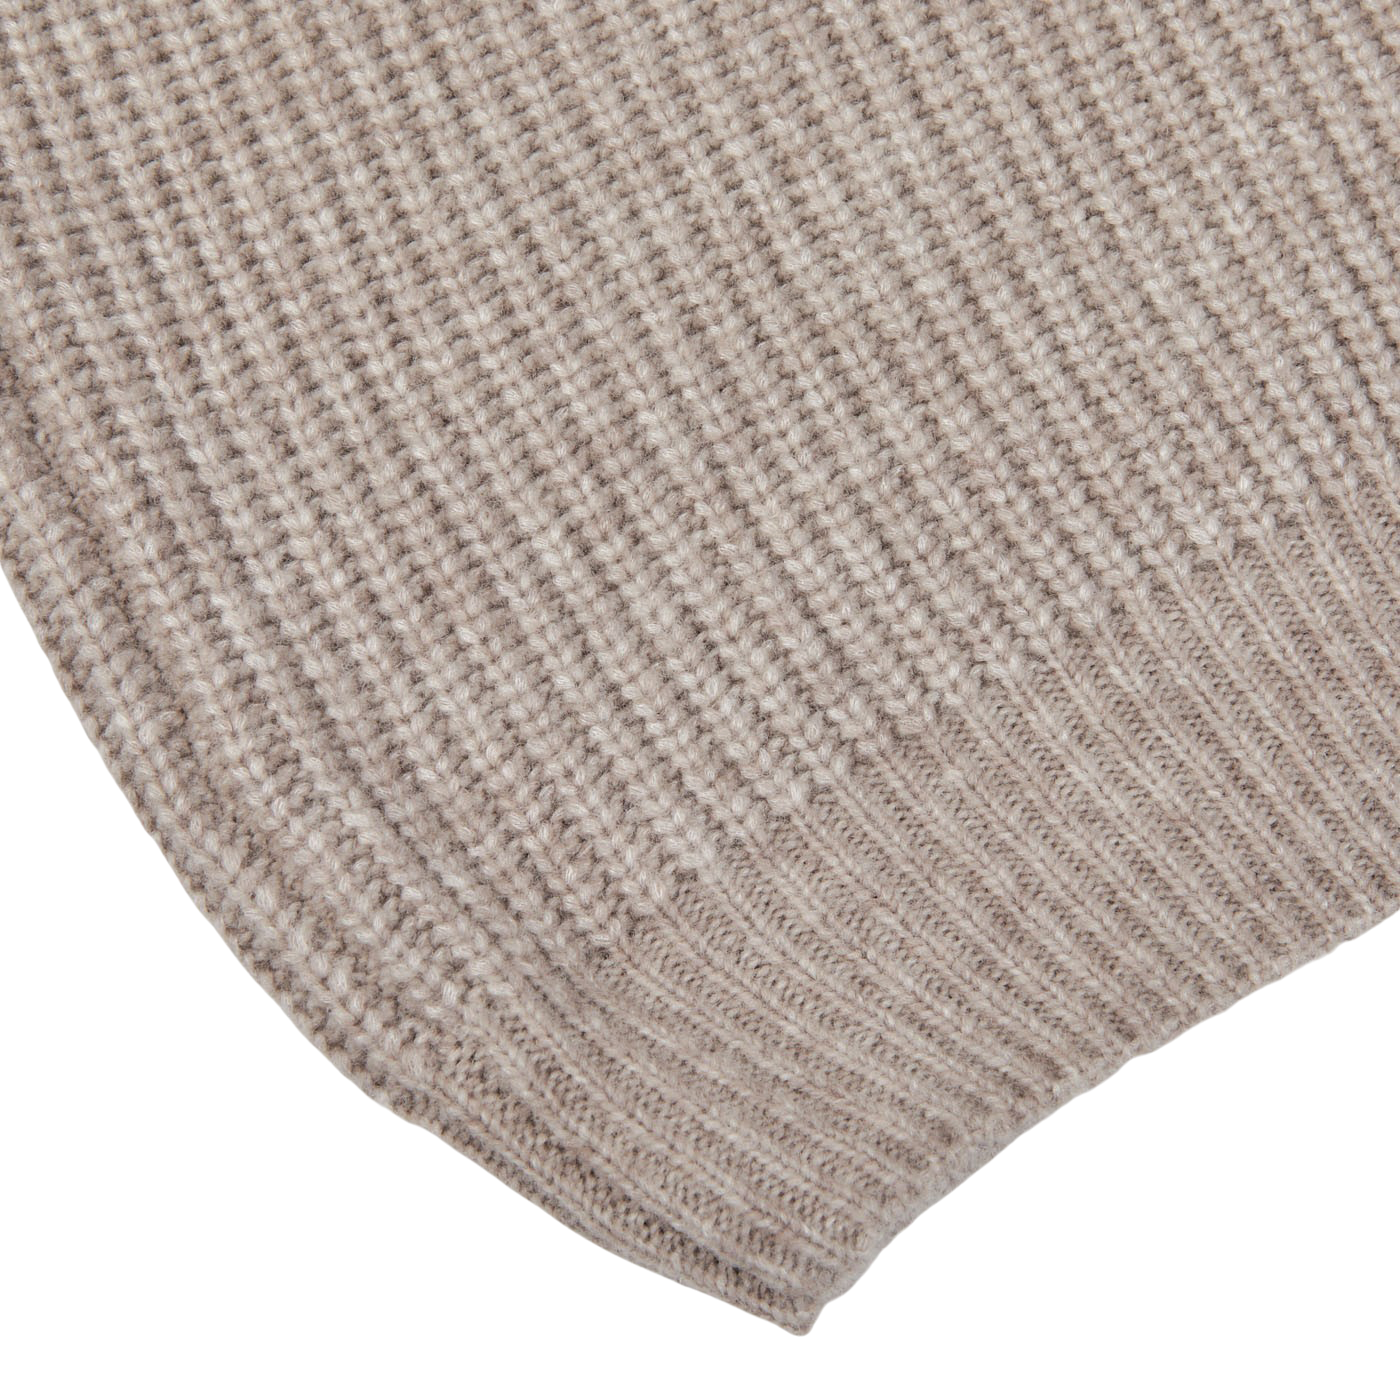 Gran Sasso Taupe Beige Wool Blend Chunky Rollneck Edge